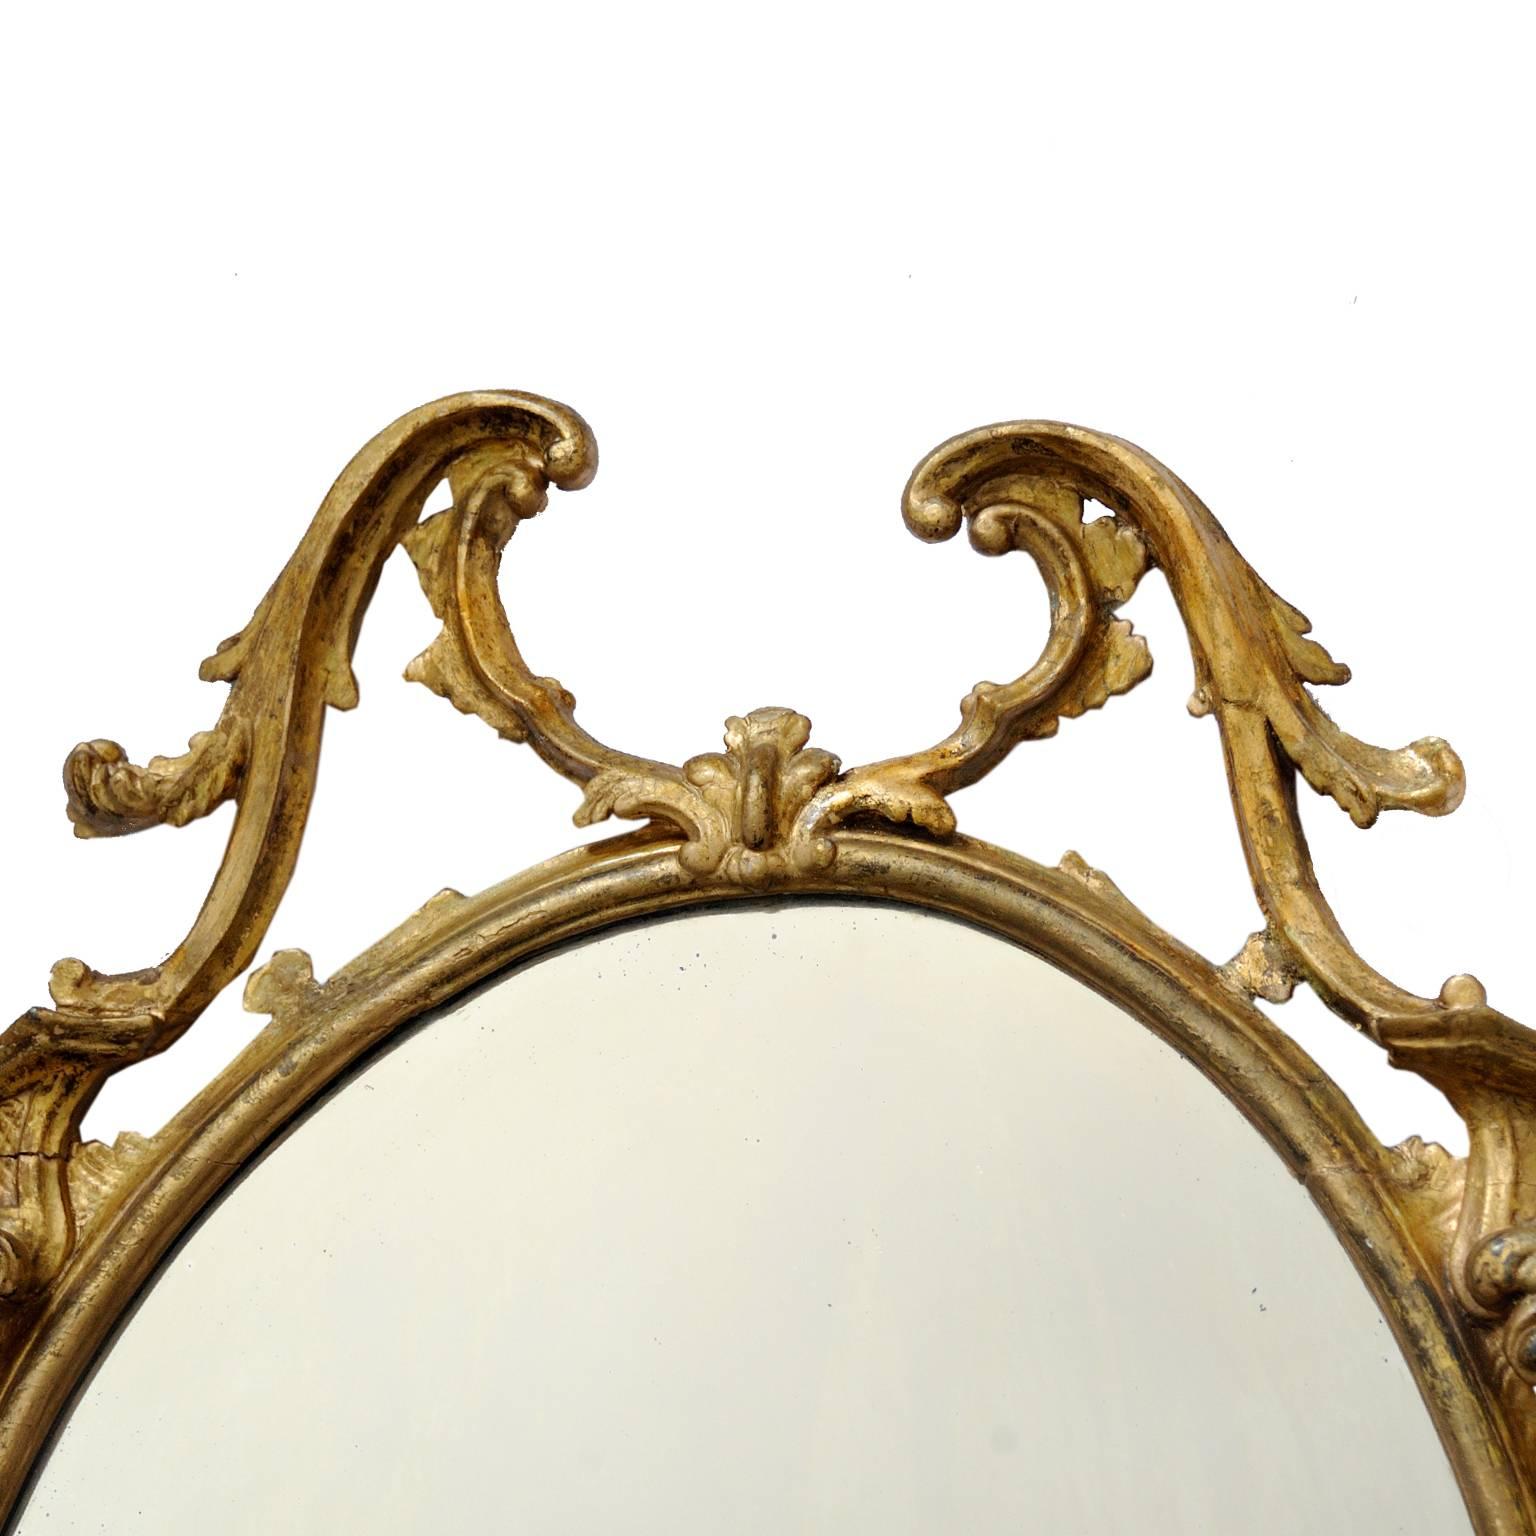 This is a large George II style gilt mirror in the Rococo taste. Carved wood and gesso with original mirror plate, circa 1860.